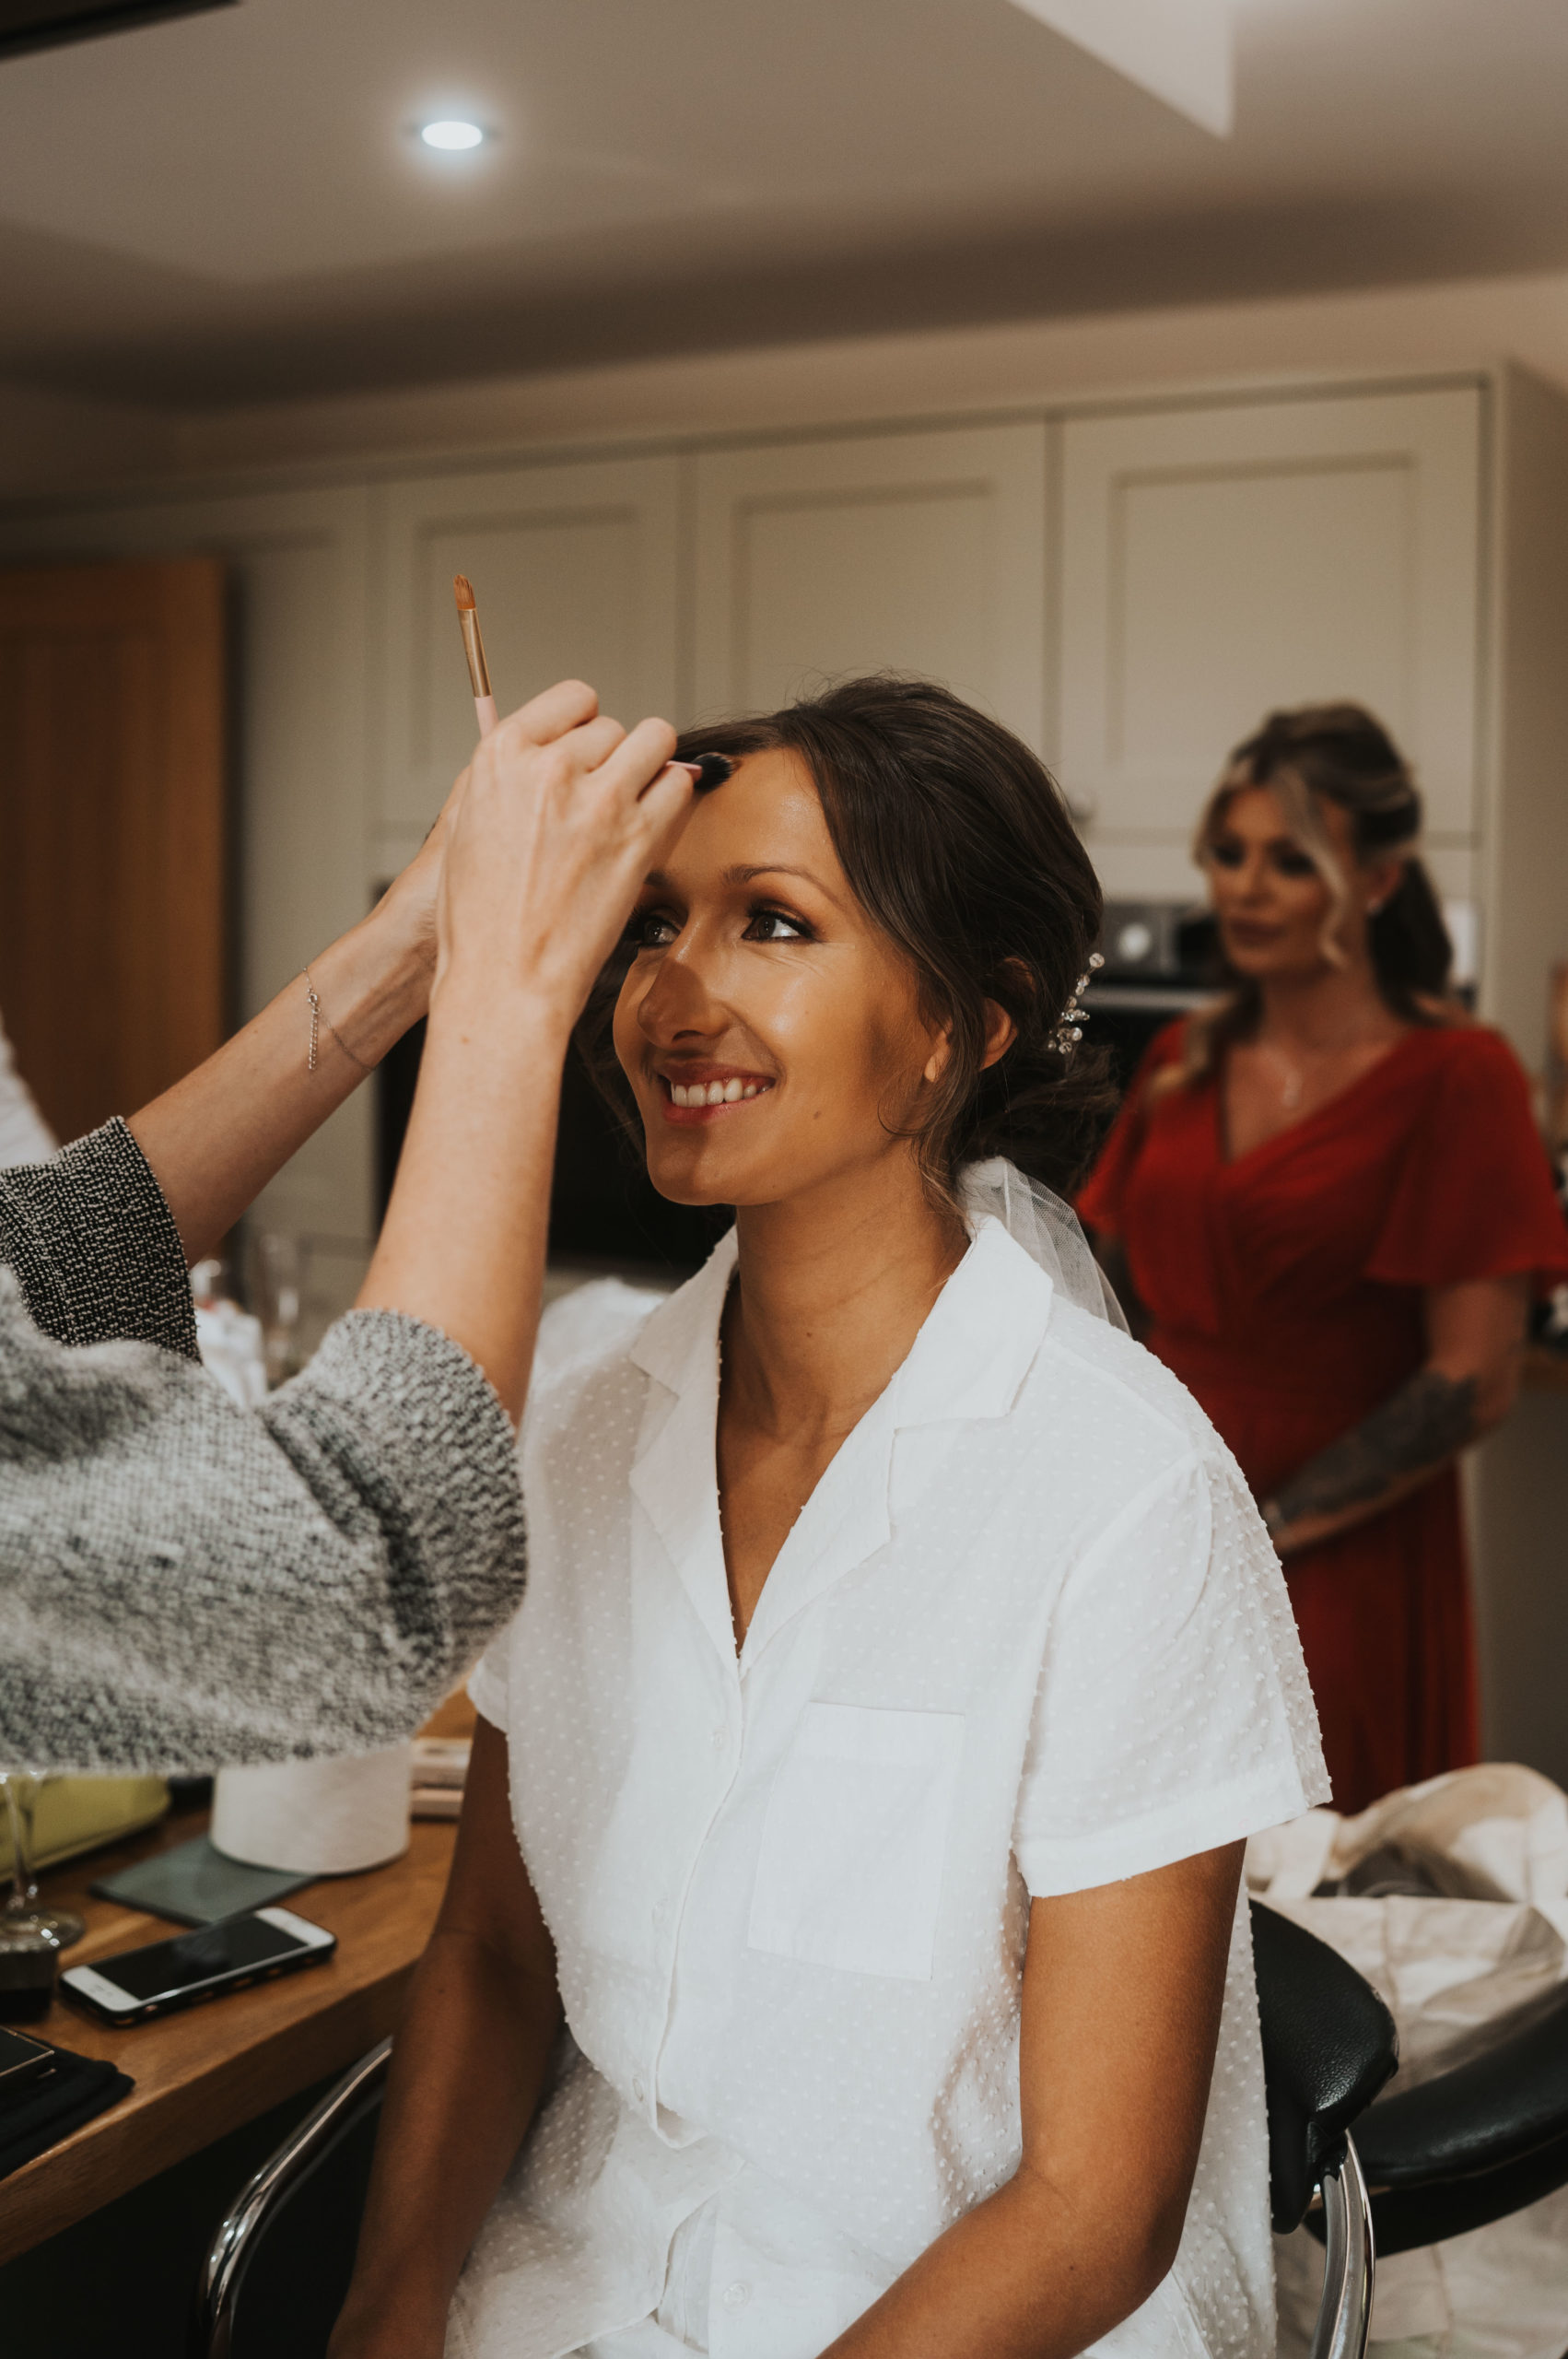 Bridal morning prep photos at home in Yorkshire with matching pjs